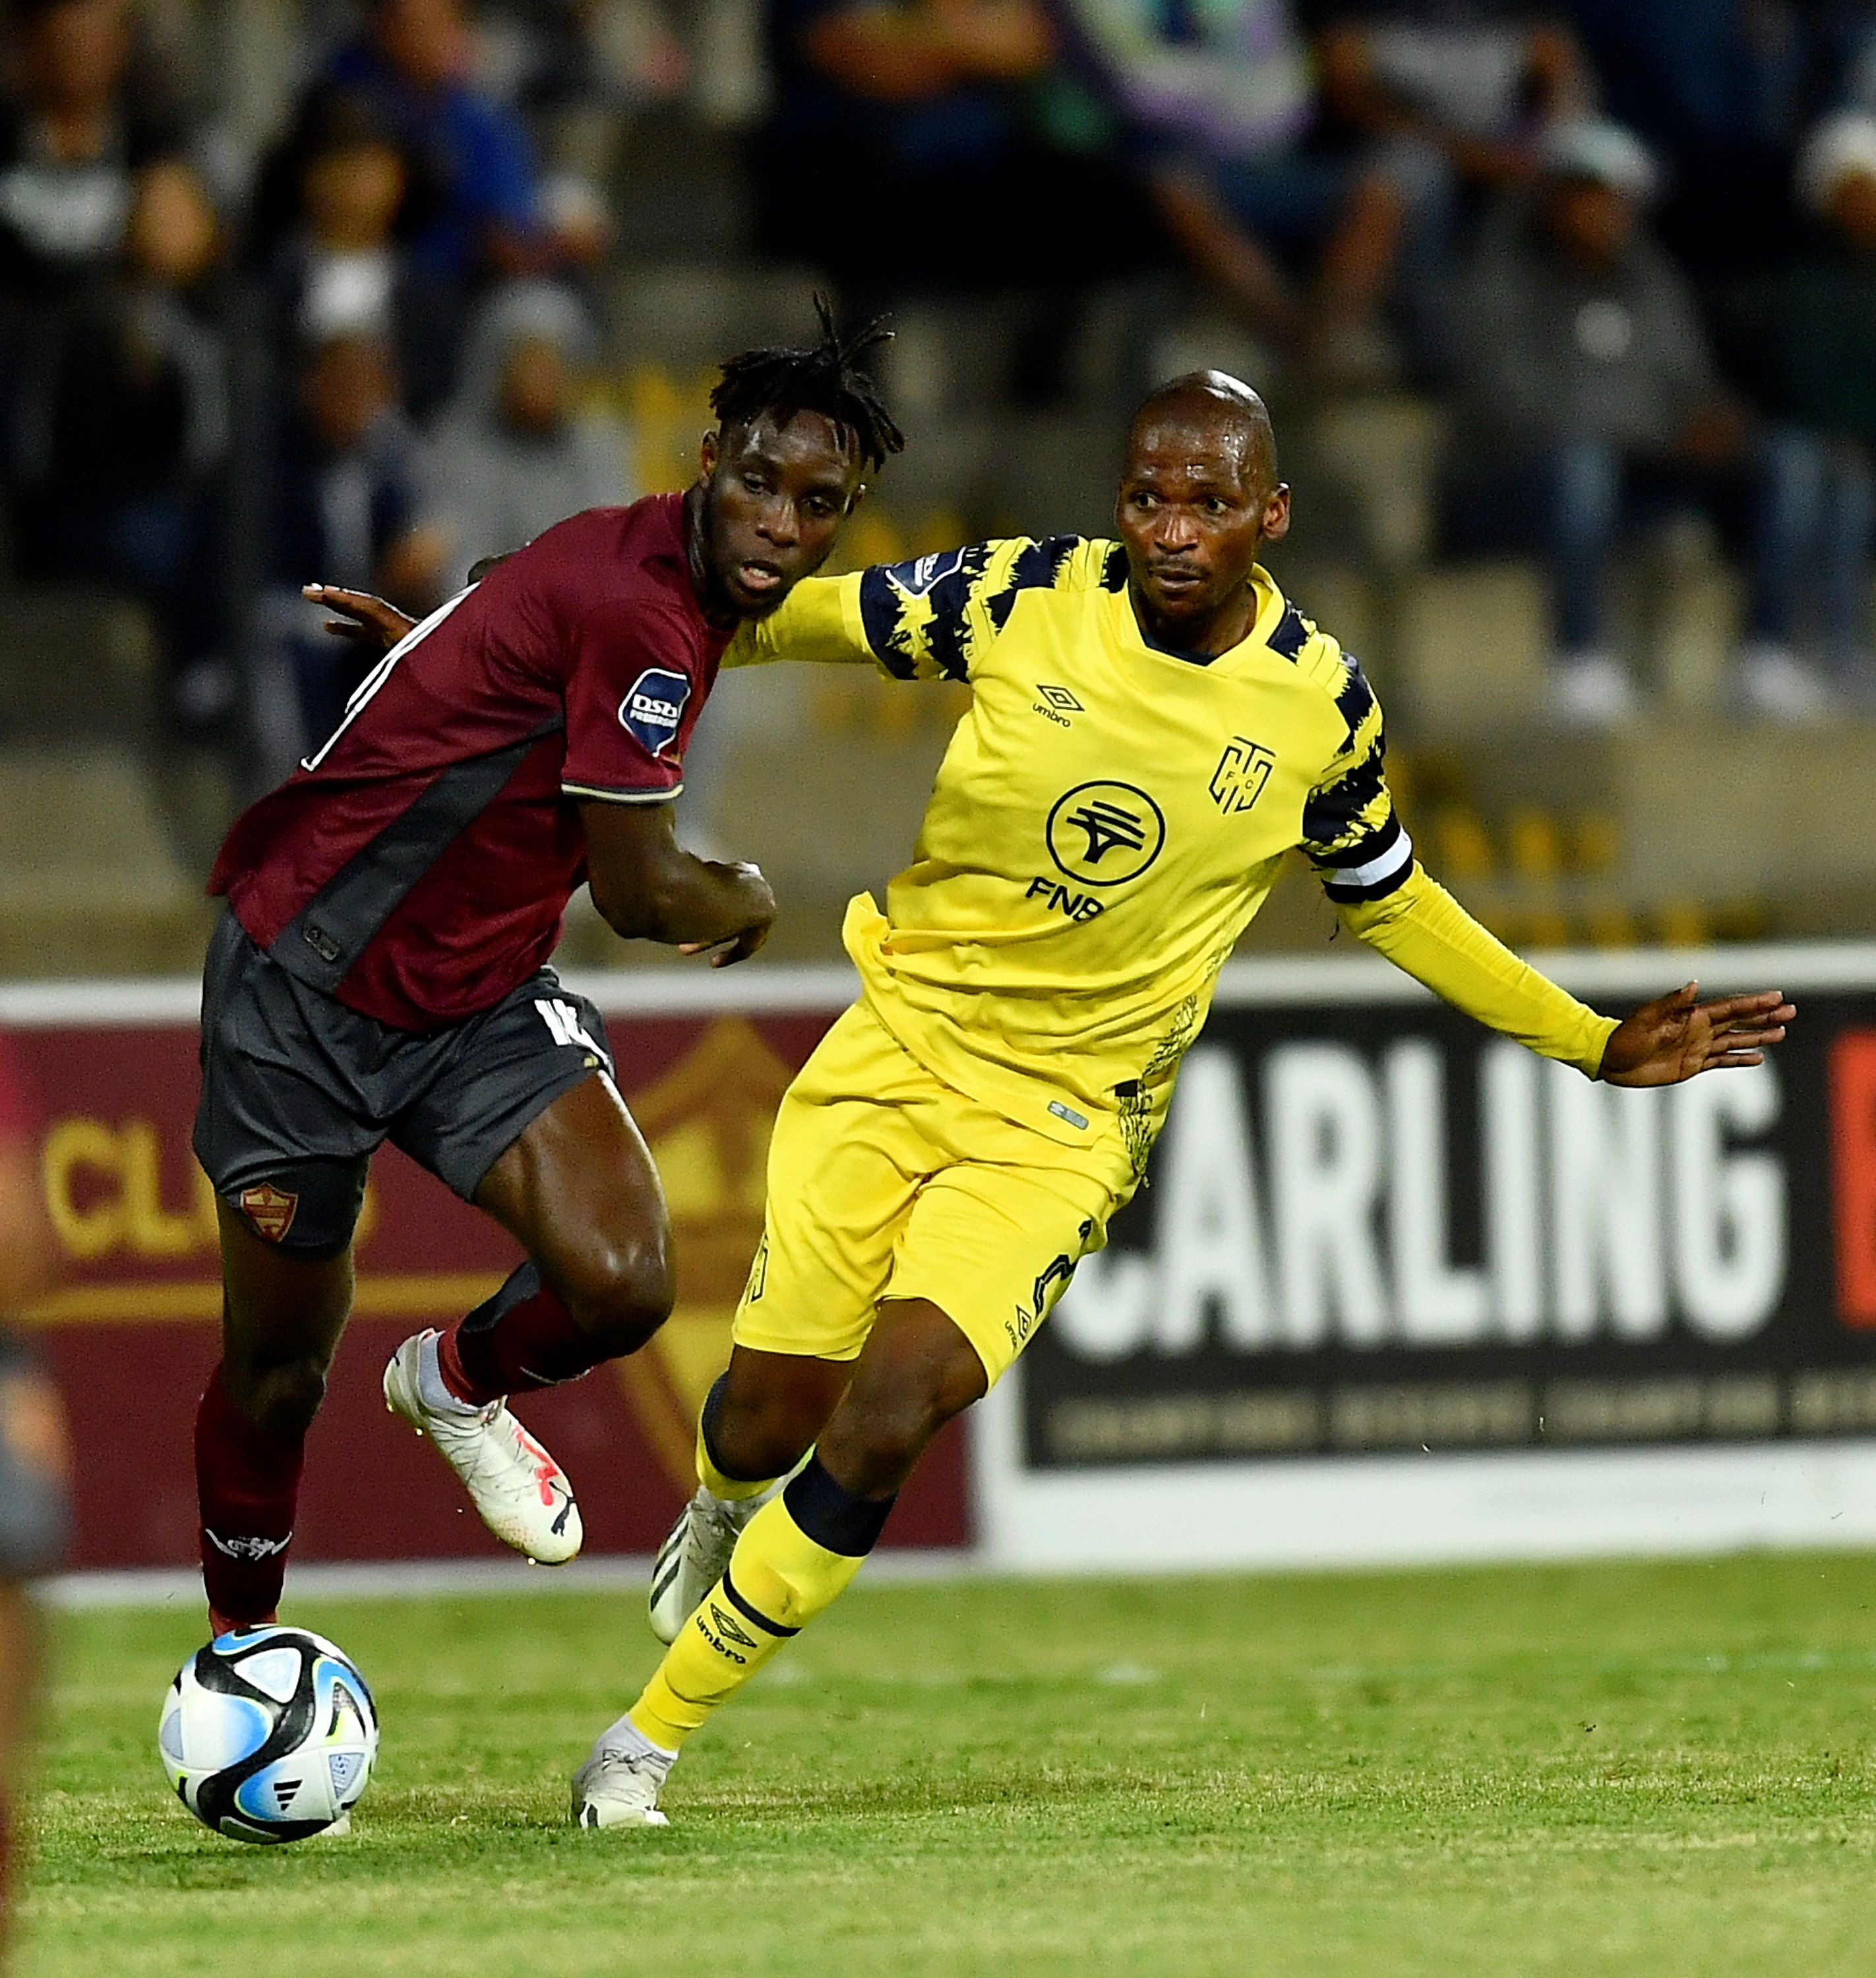 City Lining Up New Deal For Mkhize